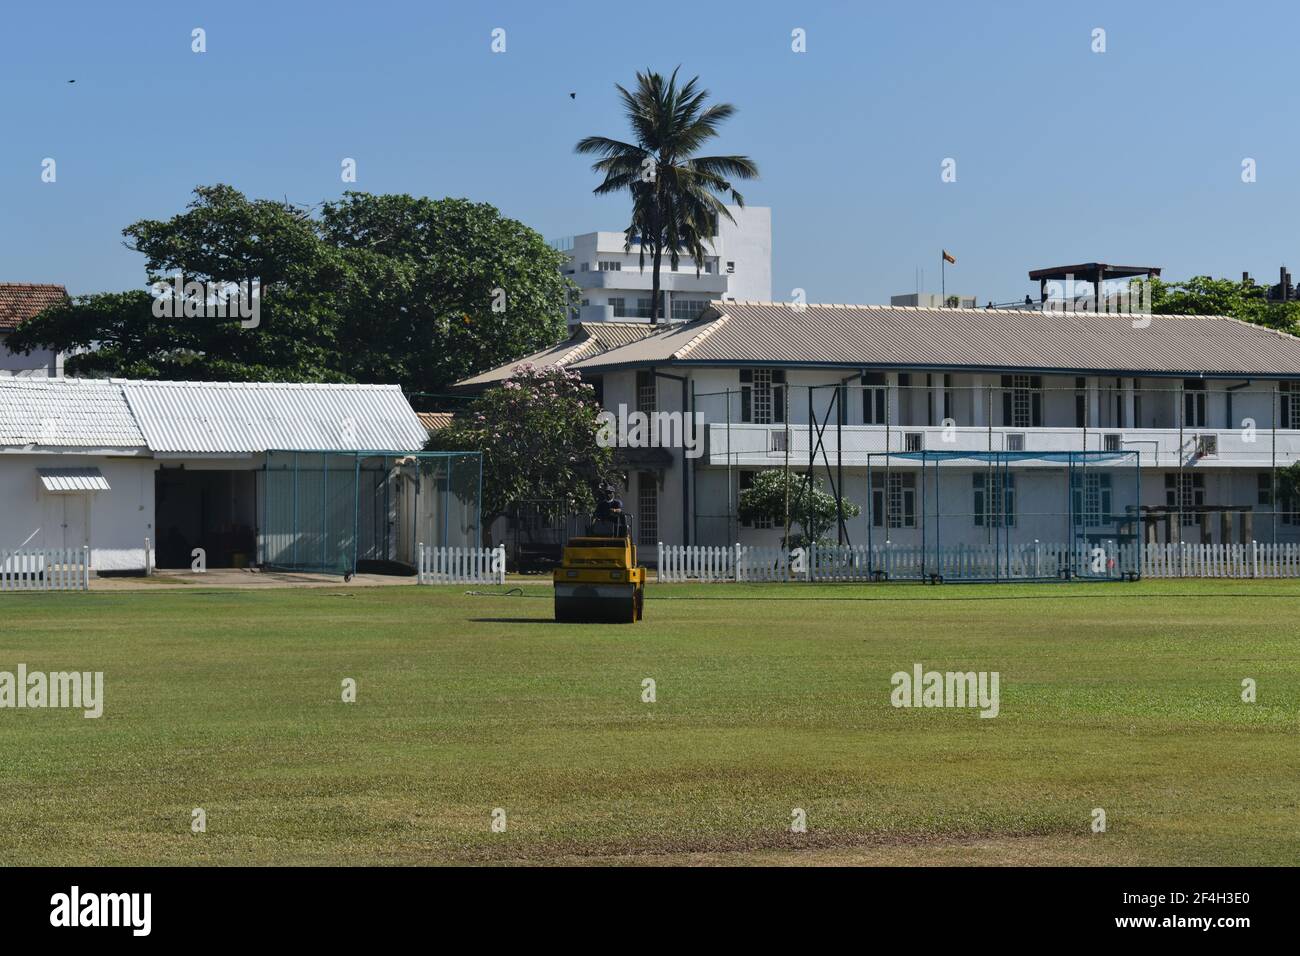 A roller machine in action. Ground staff preparing the turf wicket and ground for a cricket match at the picturistic school cricket ground. St. Thomas College, Mt. Lavinia. Colombo. Sri Lanka. Stock Photo